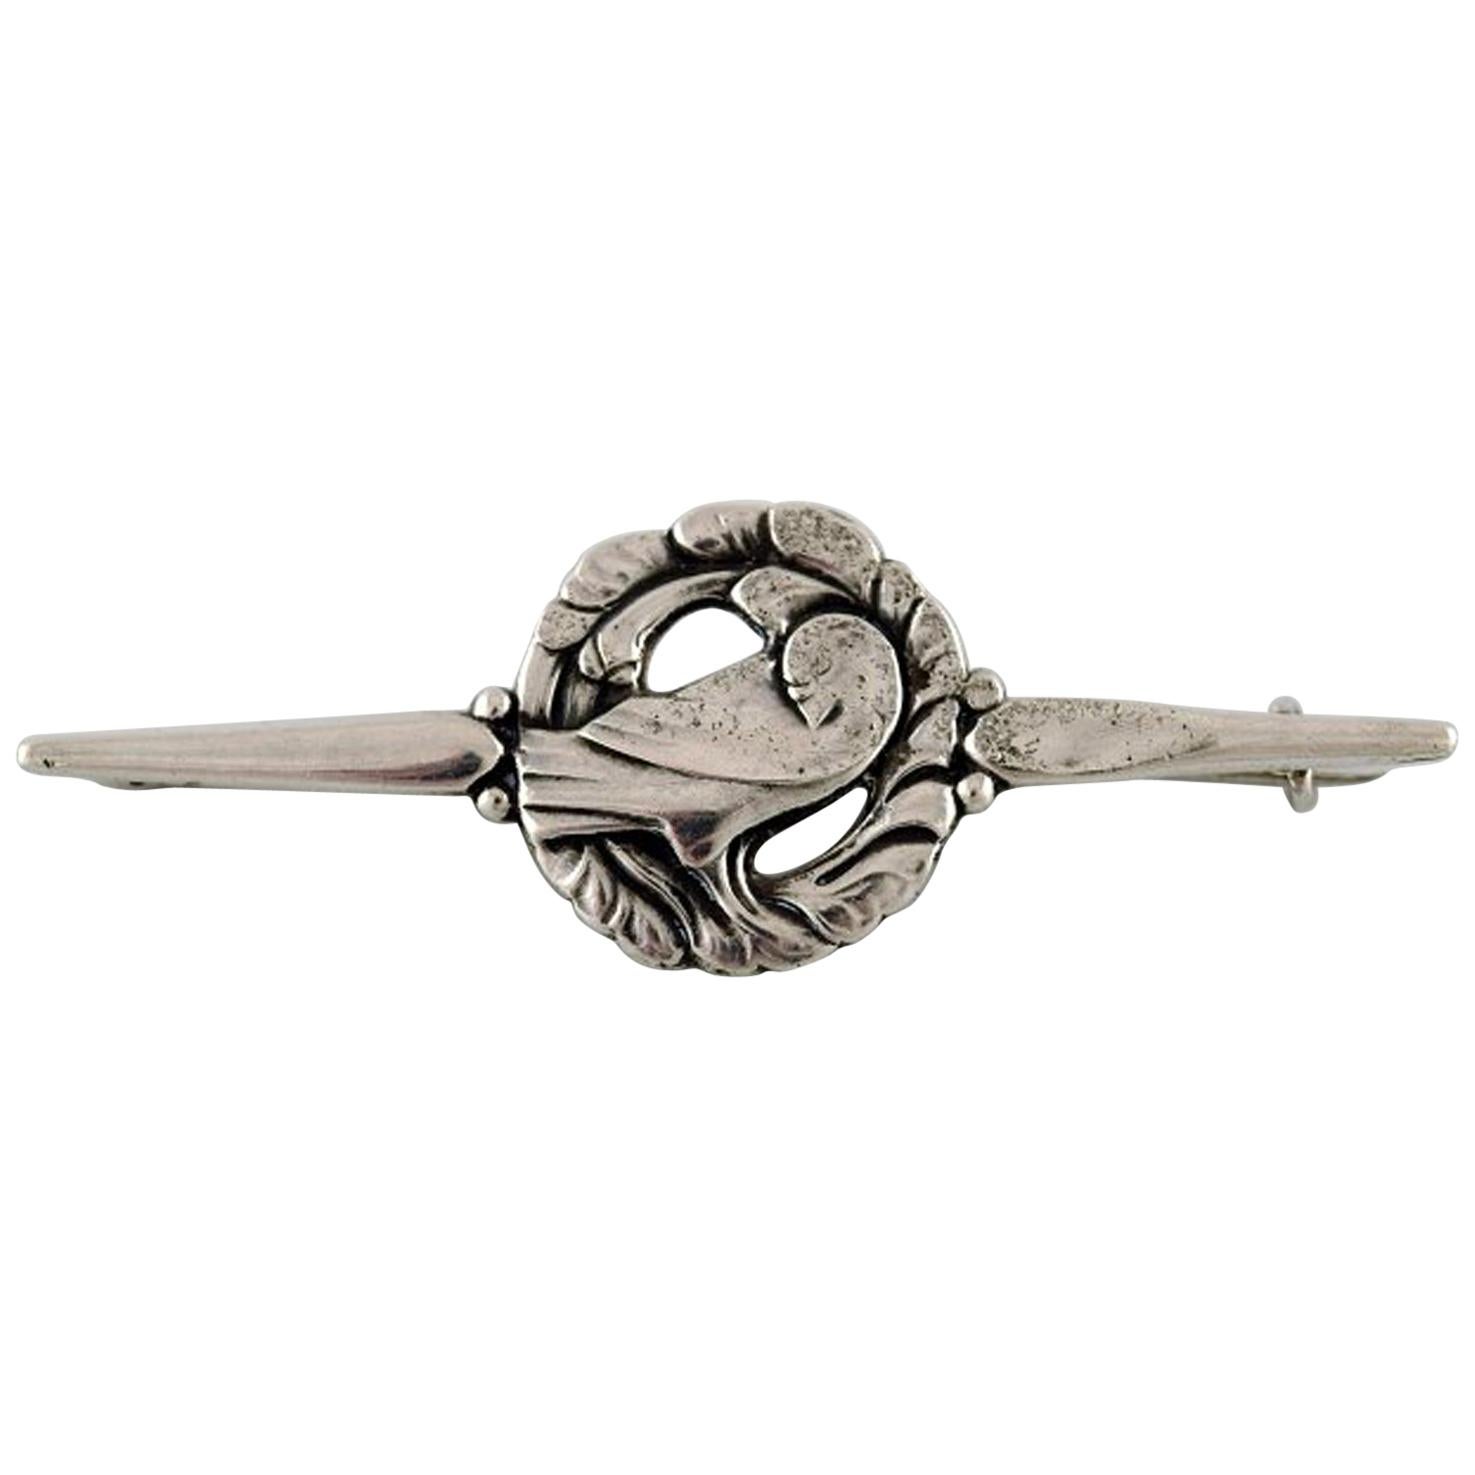 Georg Jensen, Brooch of Silver in the Form of Pigeon